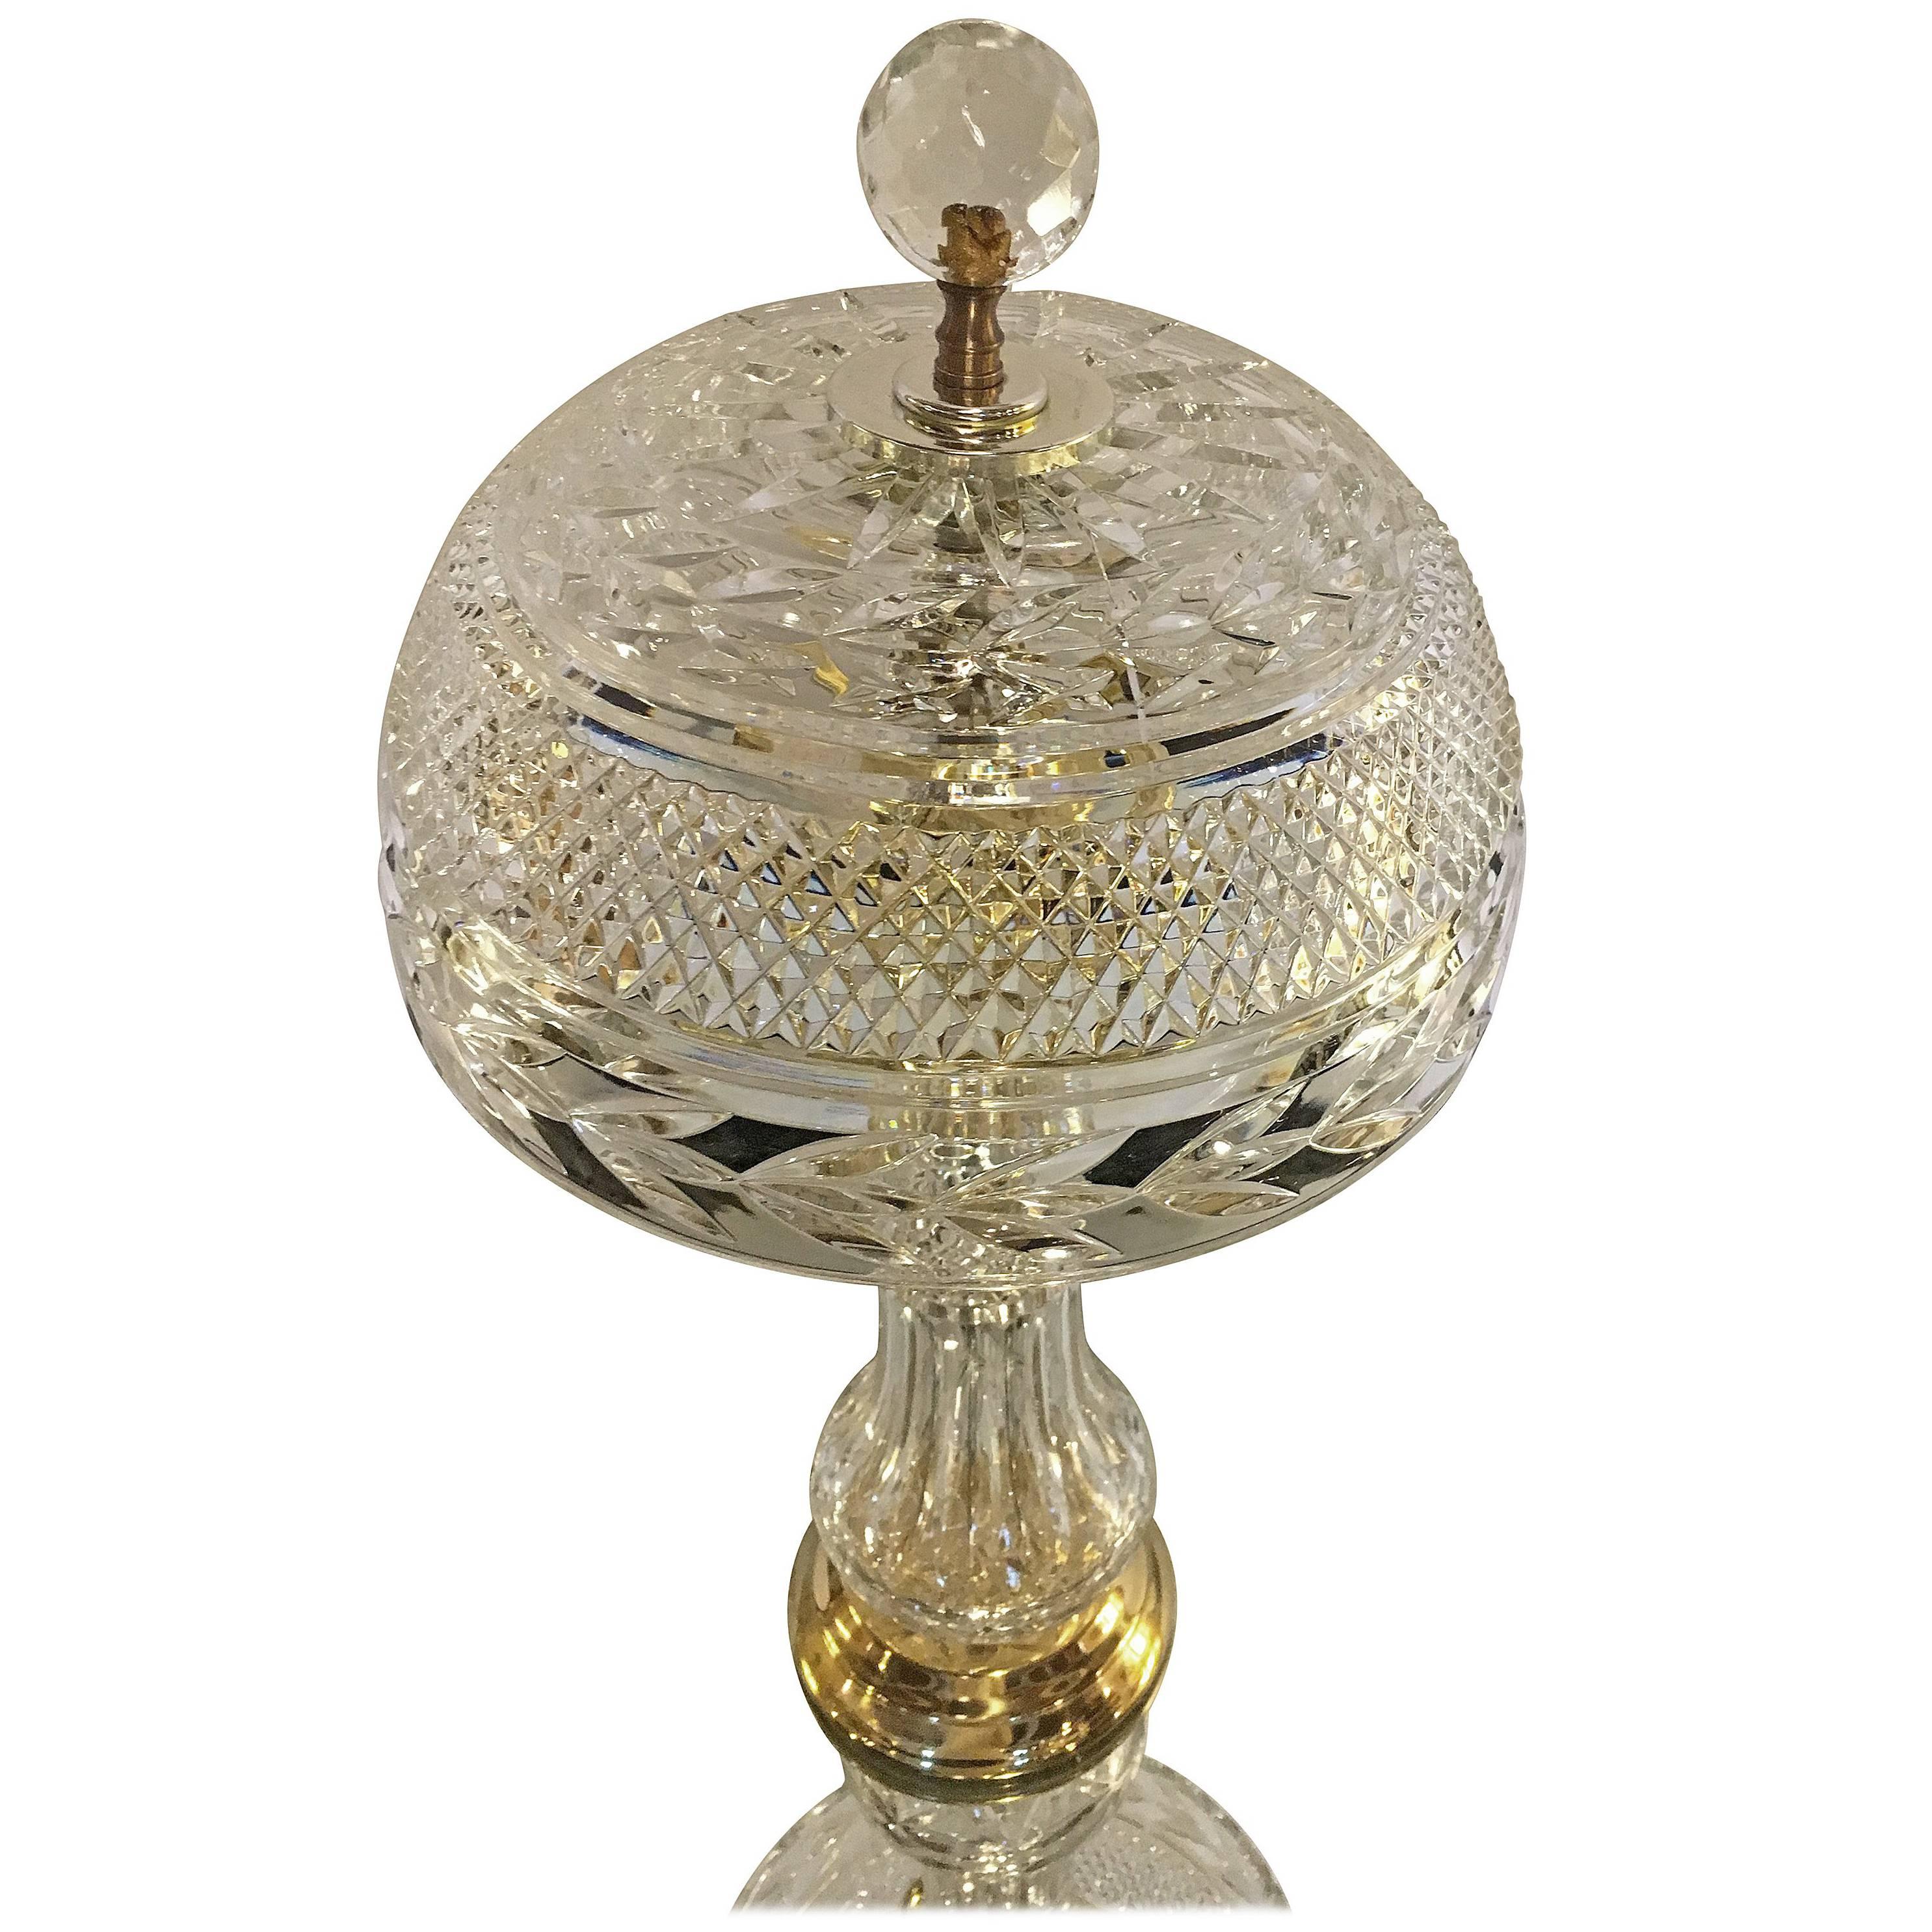 Cut Crystal Table Lamp with Crystal Shade Manner of Baccarat